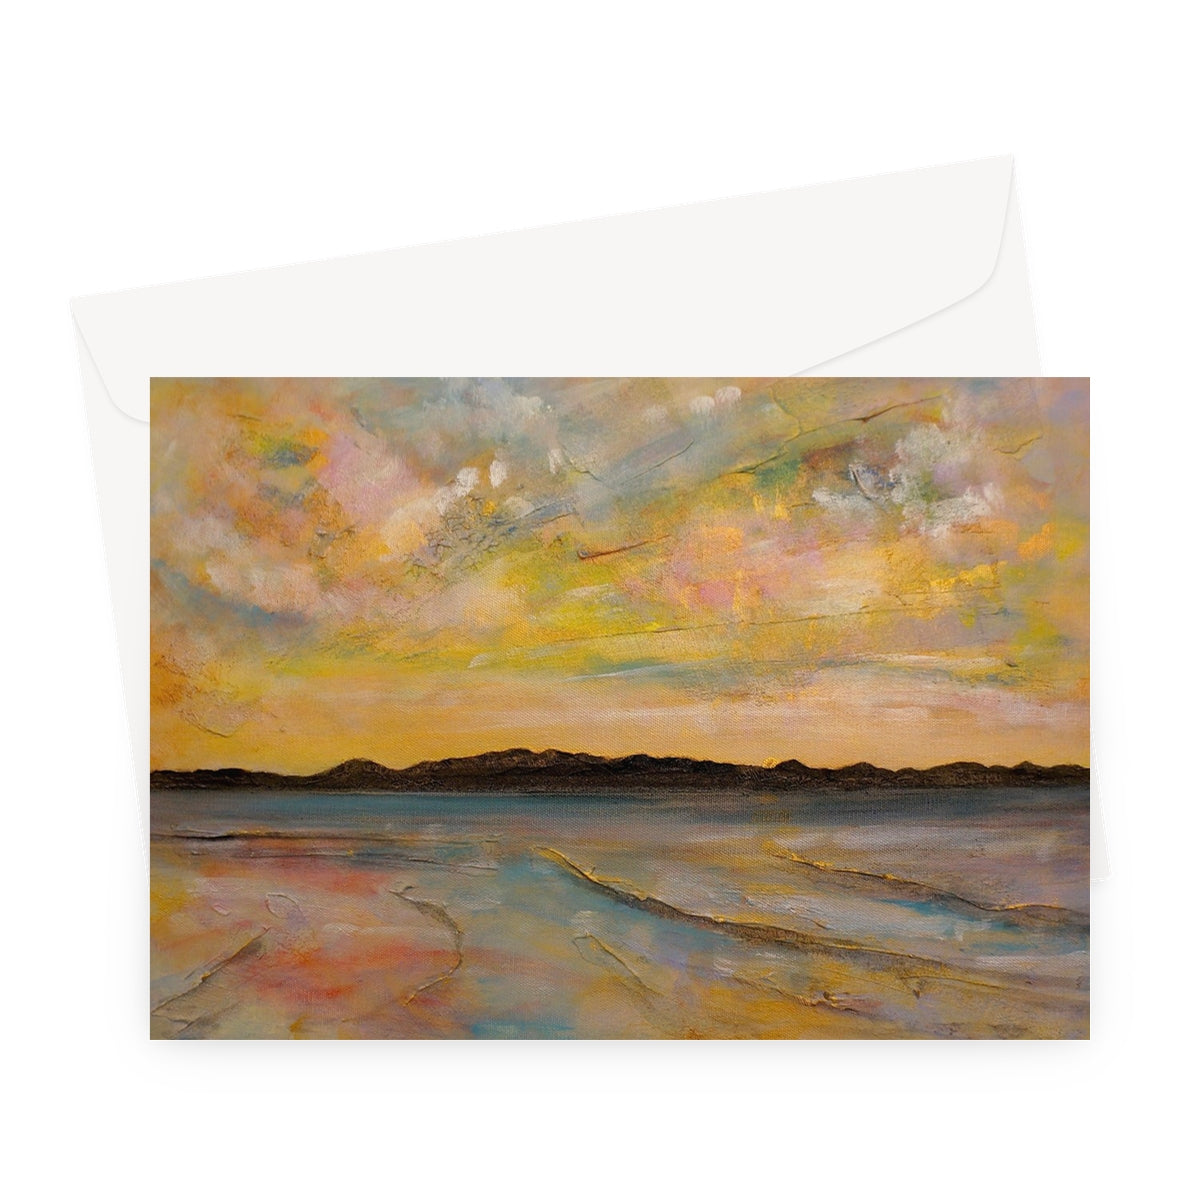 Vallay Island North Uist Art Gifts Greeting Card-Greetings Cards-Hebridean Islands Art Gallery-A5 Landscape-10 Cards-Paintings, Prints, Homeware, Art Gifts From Scotland By Scottish Artist Kevin Hunter